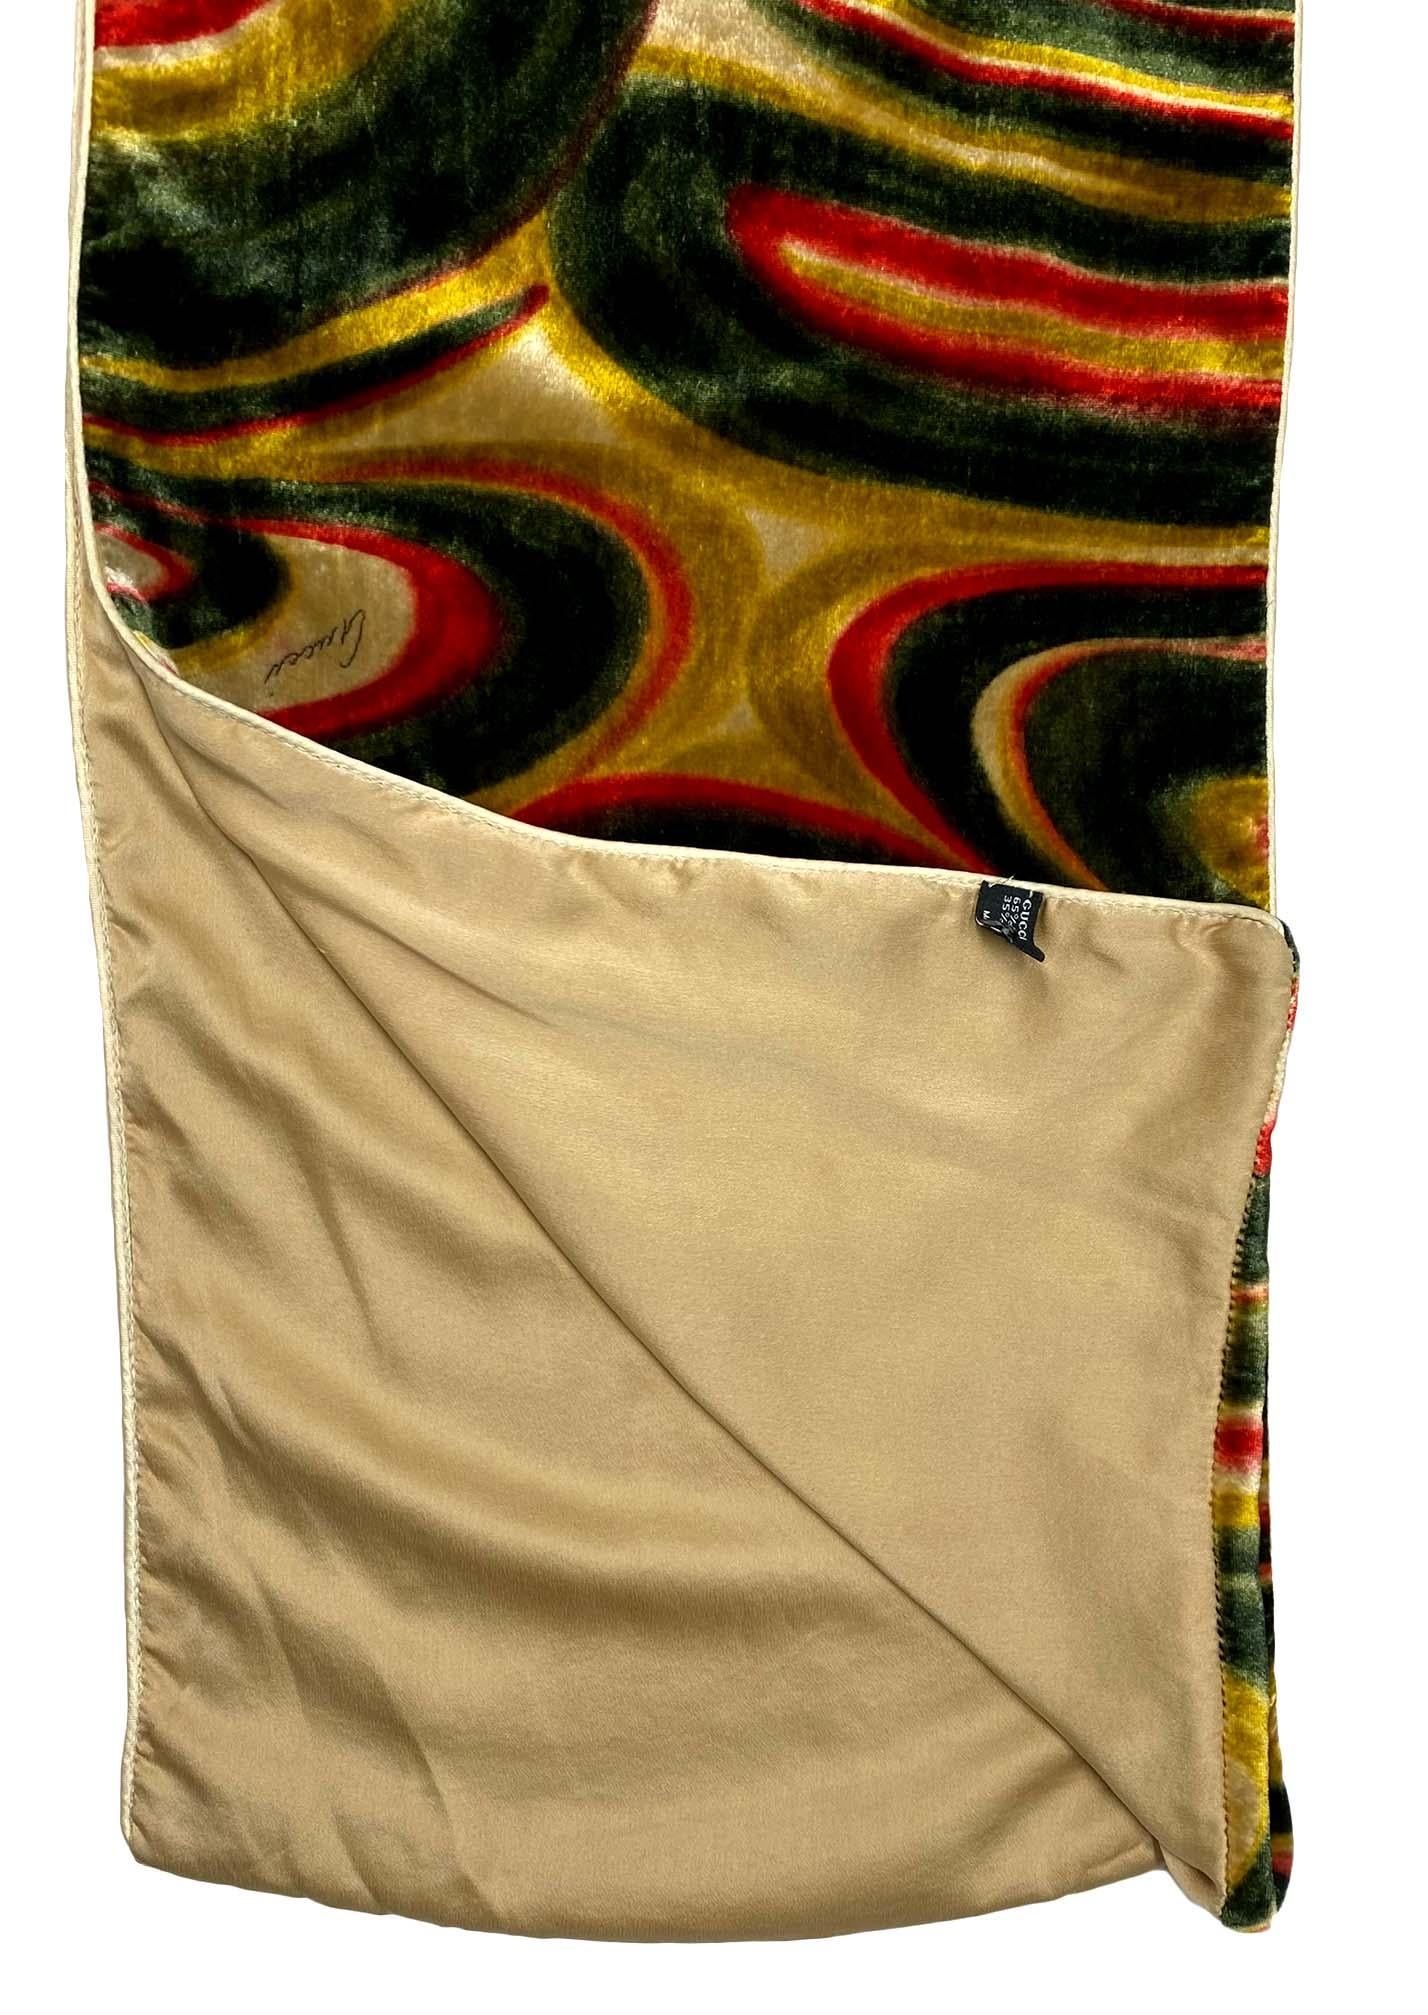 F/W 1999 Gucci by Tom Ford Psychedelic Velvet Swirl Scarf 1